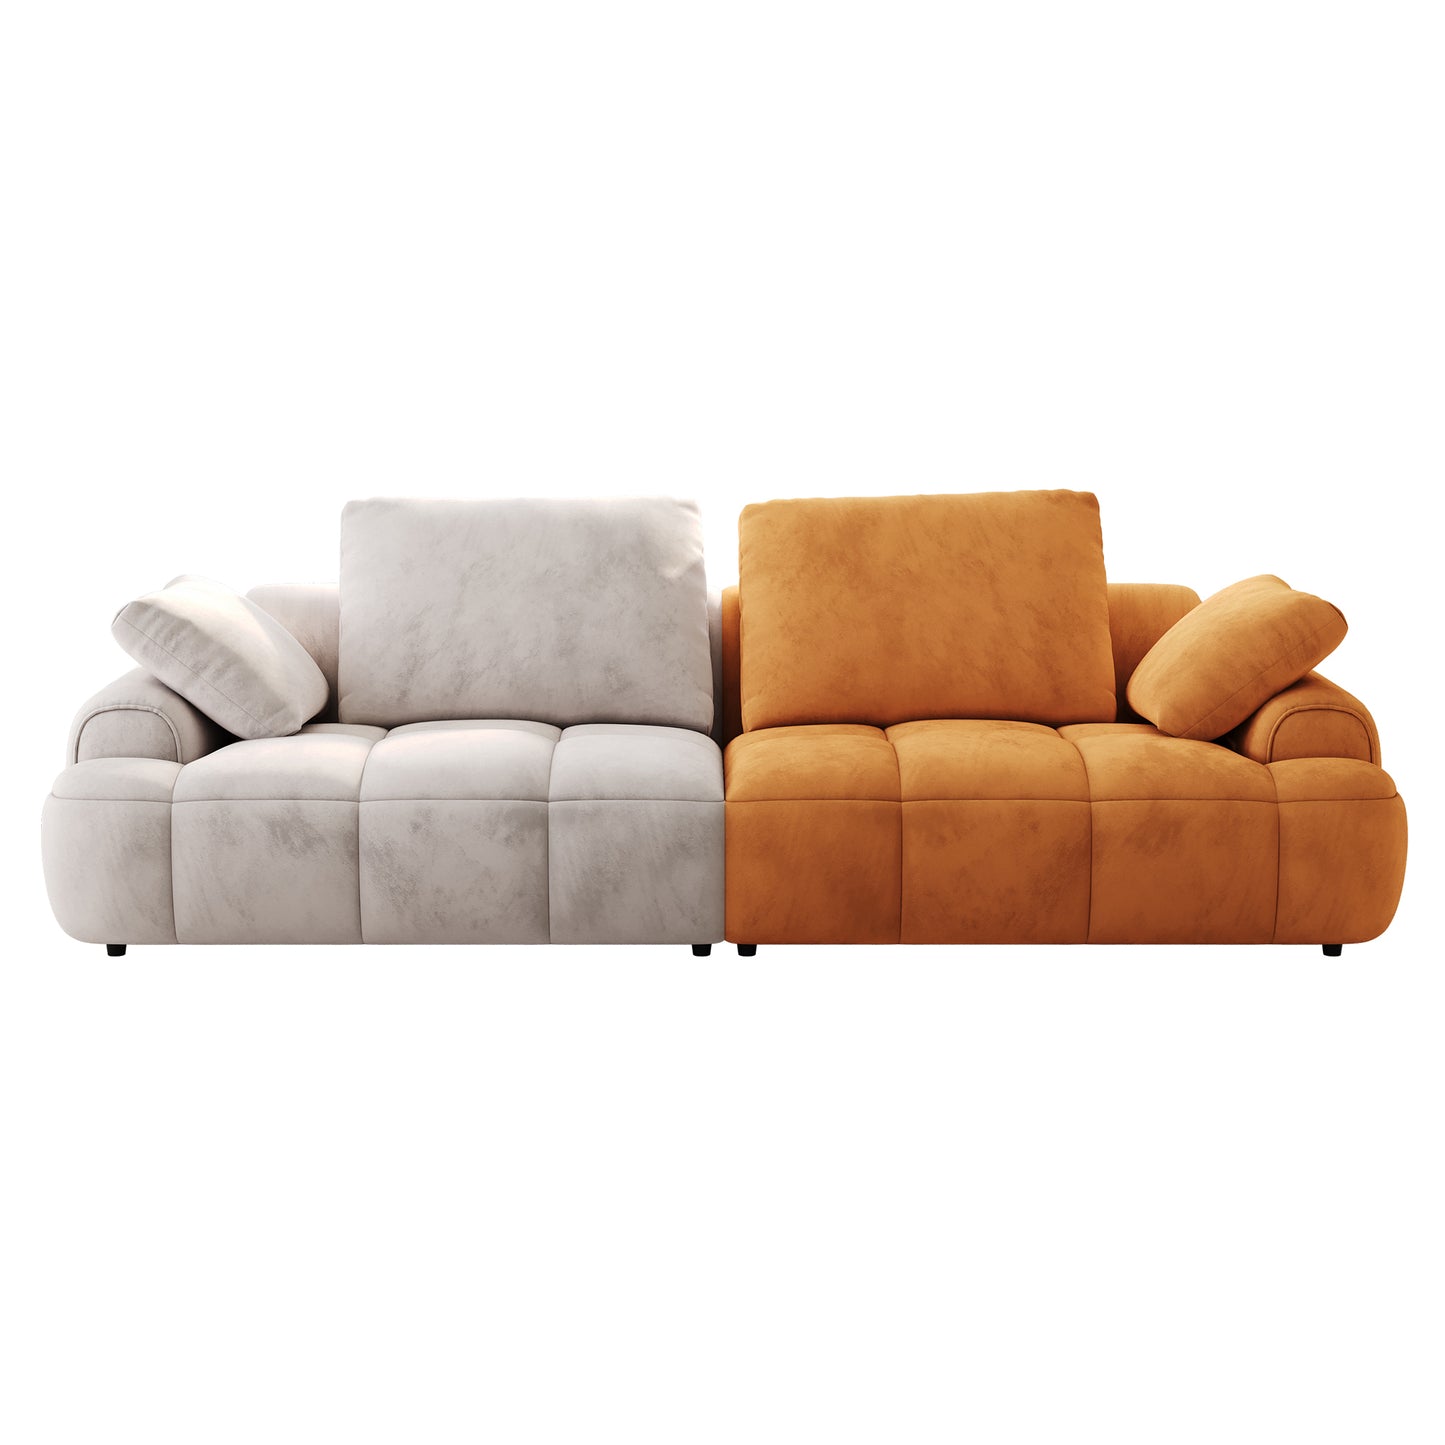 86.6″ Large size two Seat Sofa,Modern Upholstered,Beige paired with yellow suede fabric